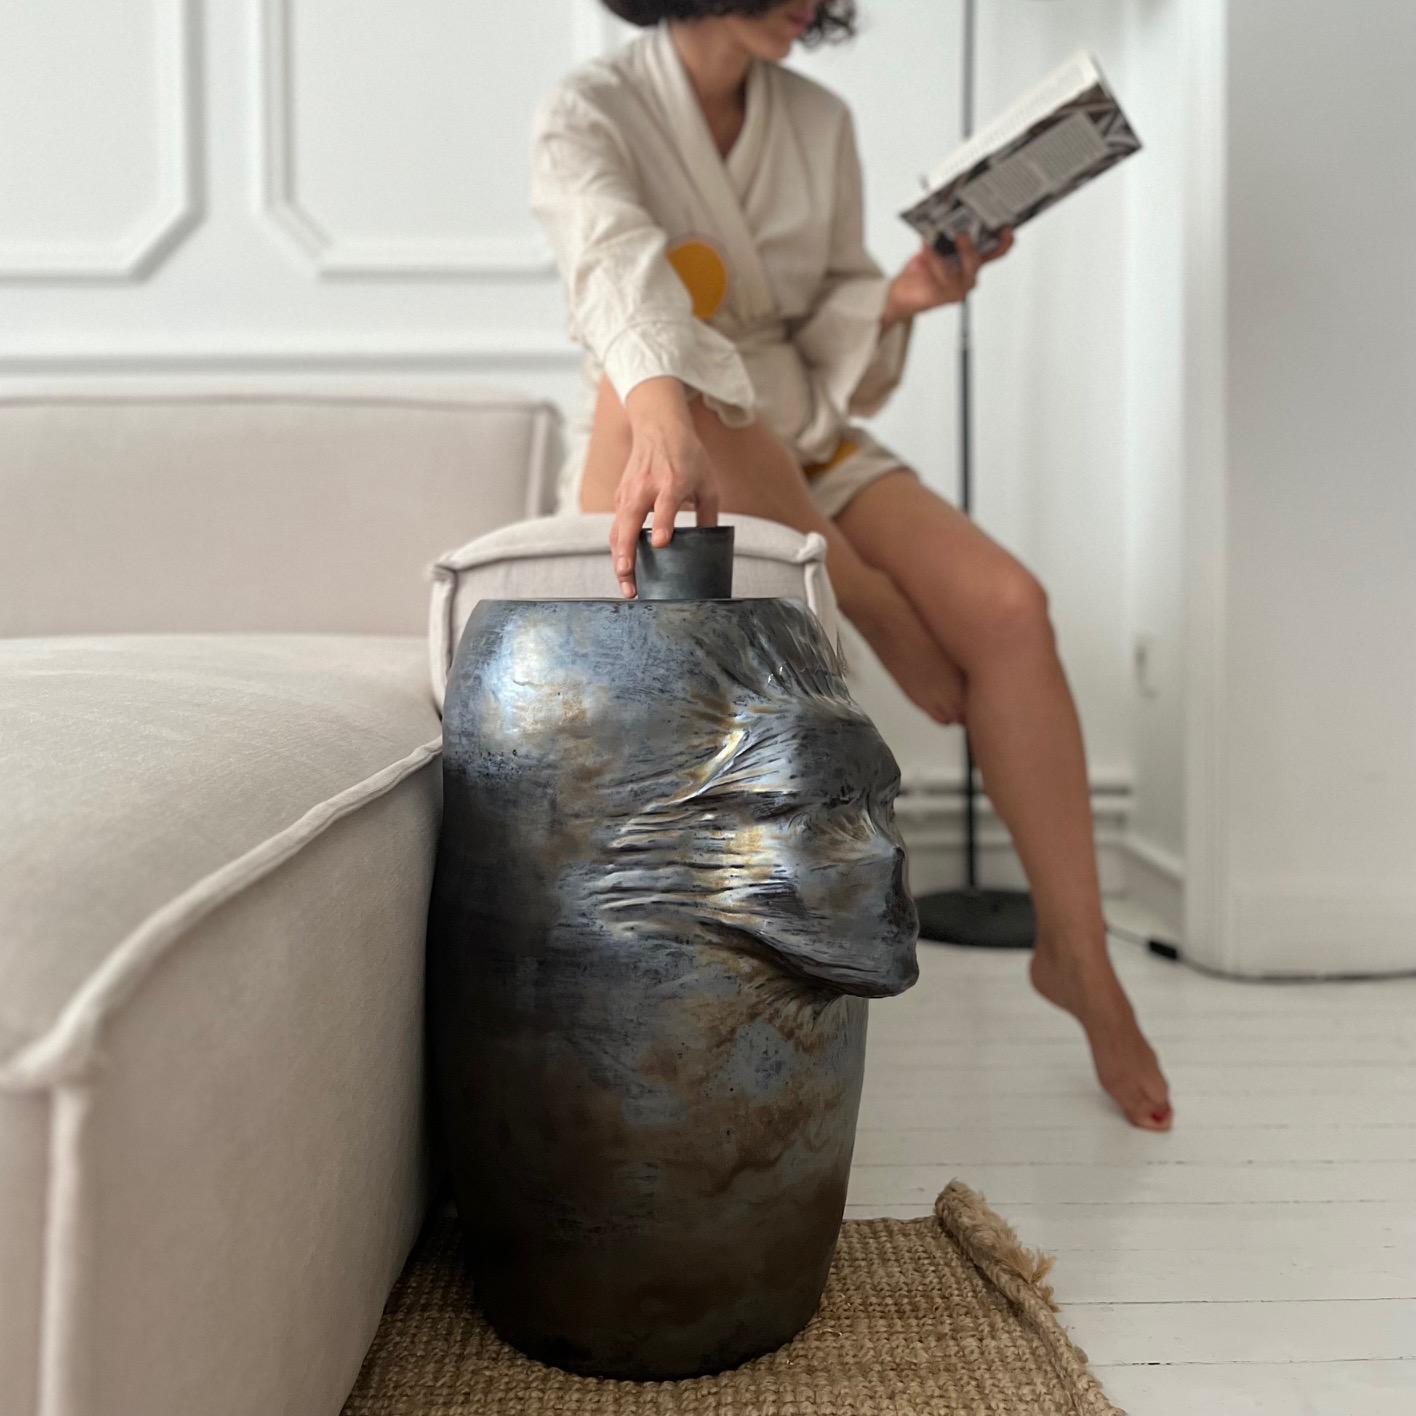 A sculptural ceramic side table handmade by the ceramic artist Hulya Sozer. 
Metallic effect glaze.
Height: 50cm / Diameter: 25cm

Hulya Sozer is a ceramic artist, based in Istanbul, who specialised in figurative sculptures. Her work mostly focuses